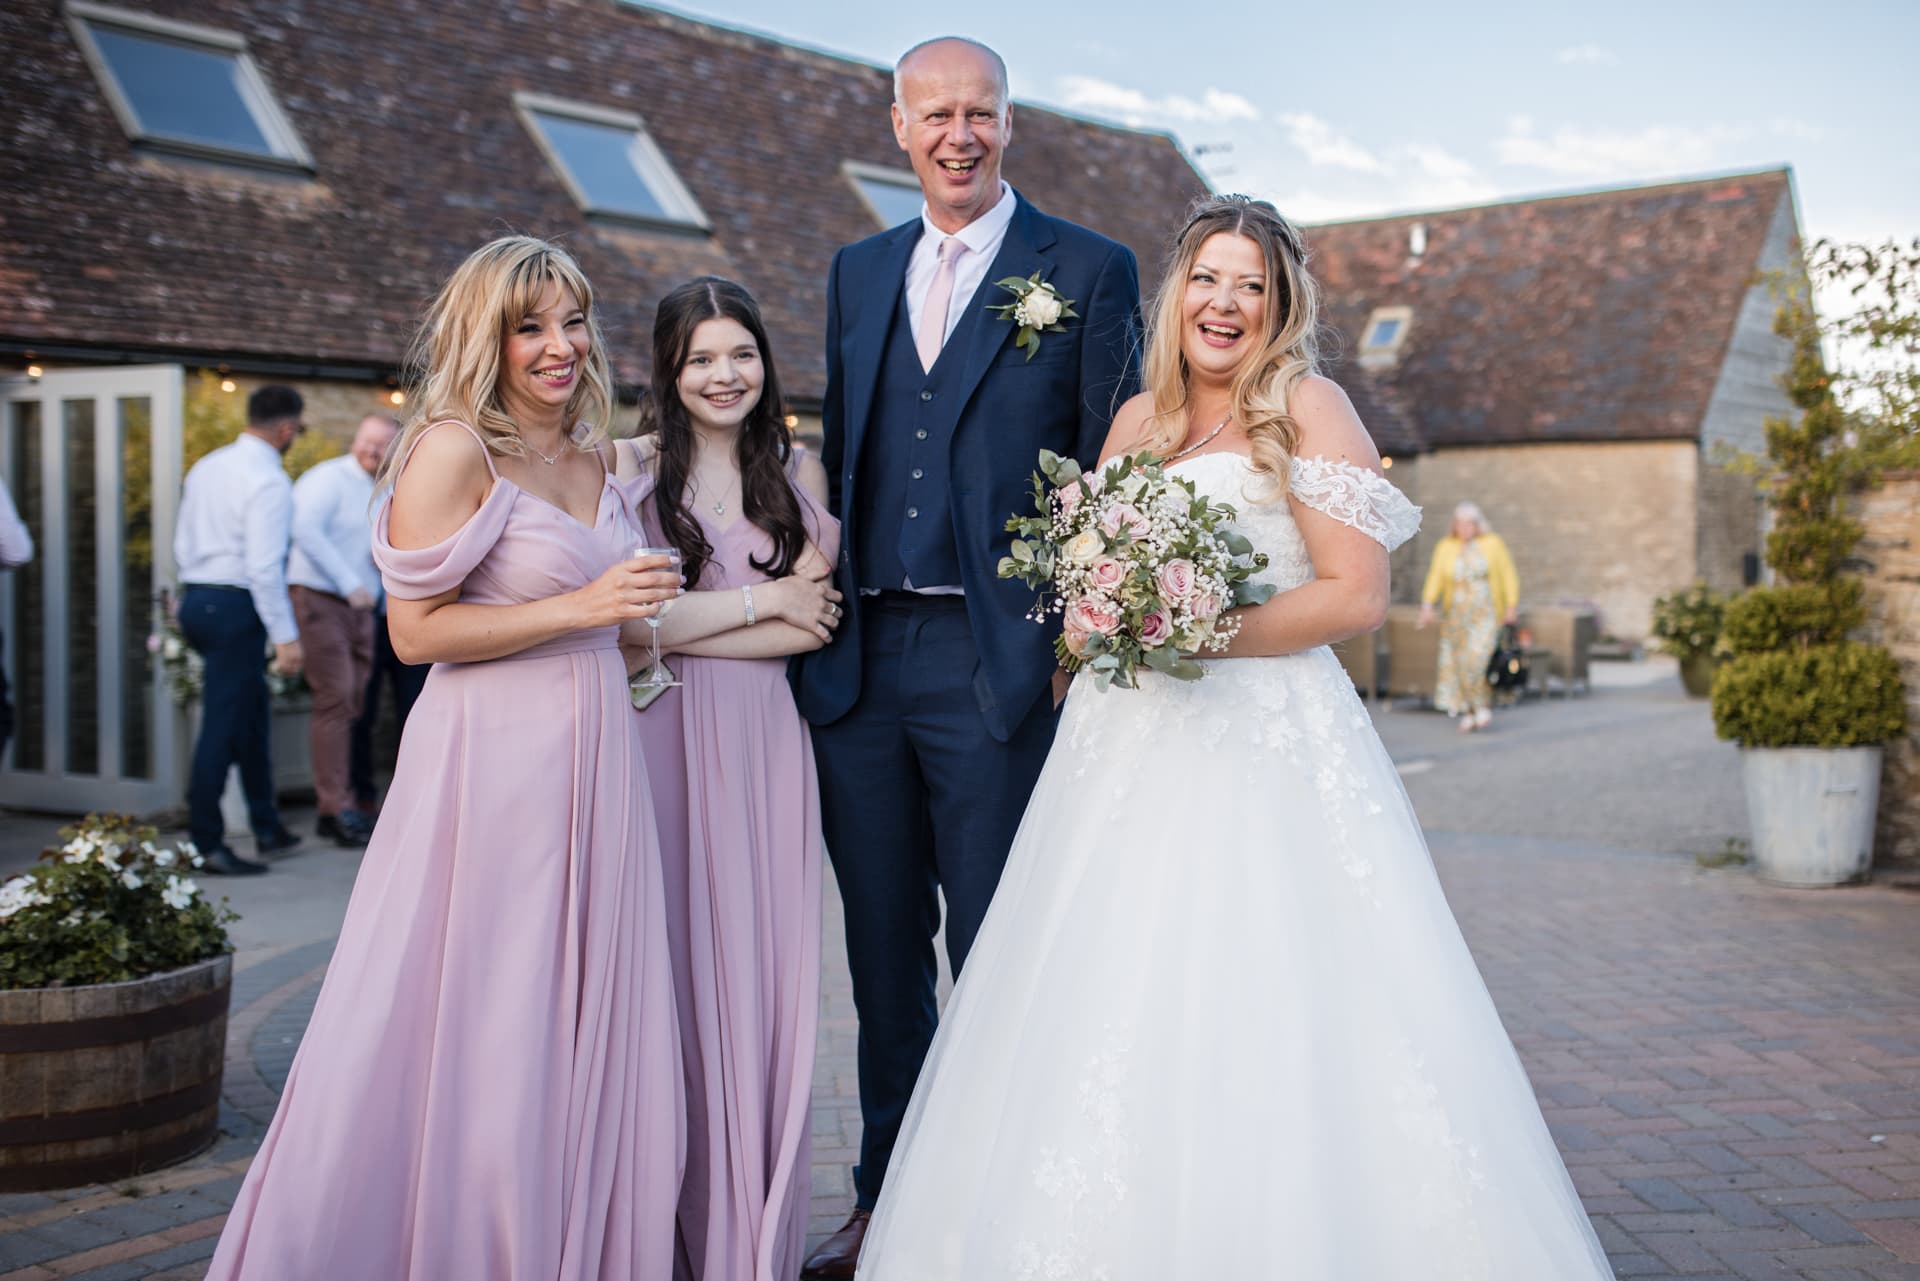 Wedding Party looking happy for camera in the courtyard of Stratton Court Barn Wedding Venue